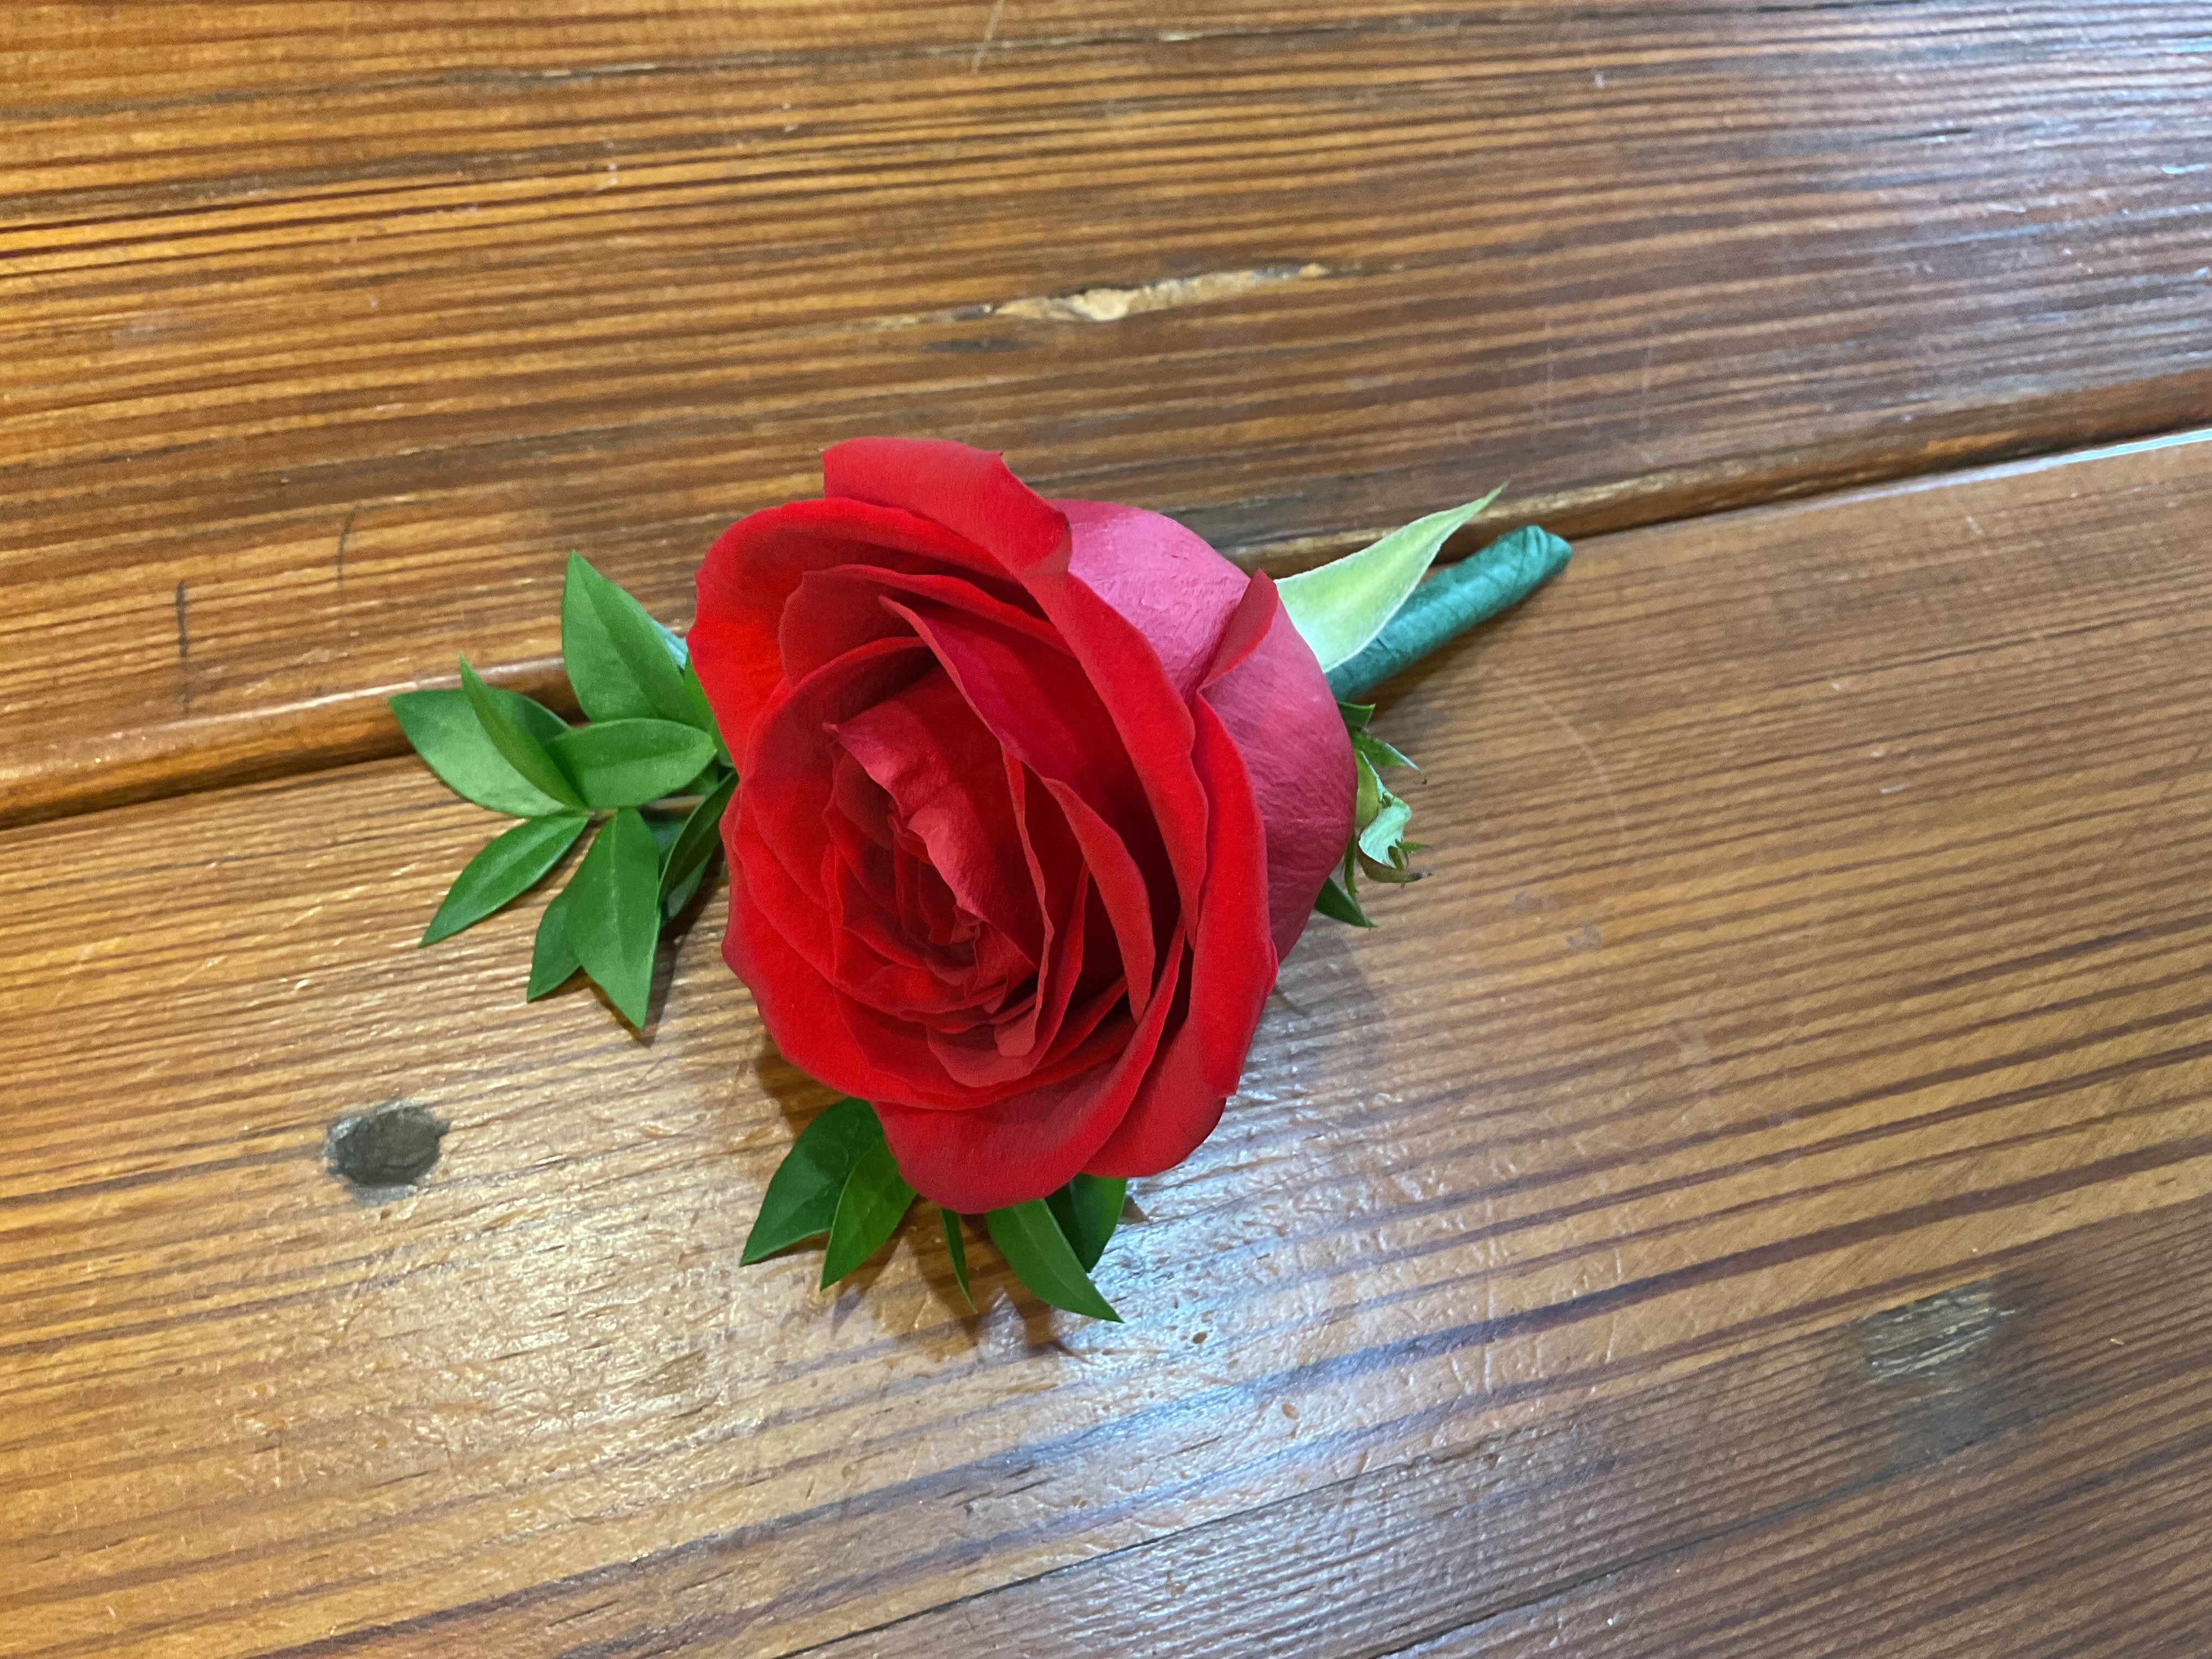 Boutonniere - Red rose or white rose boutonniere